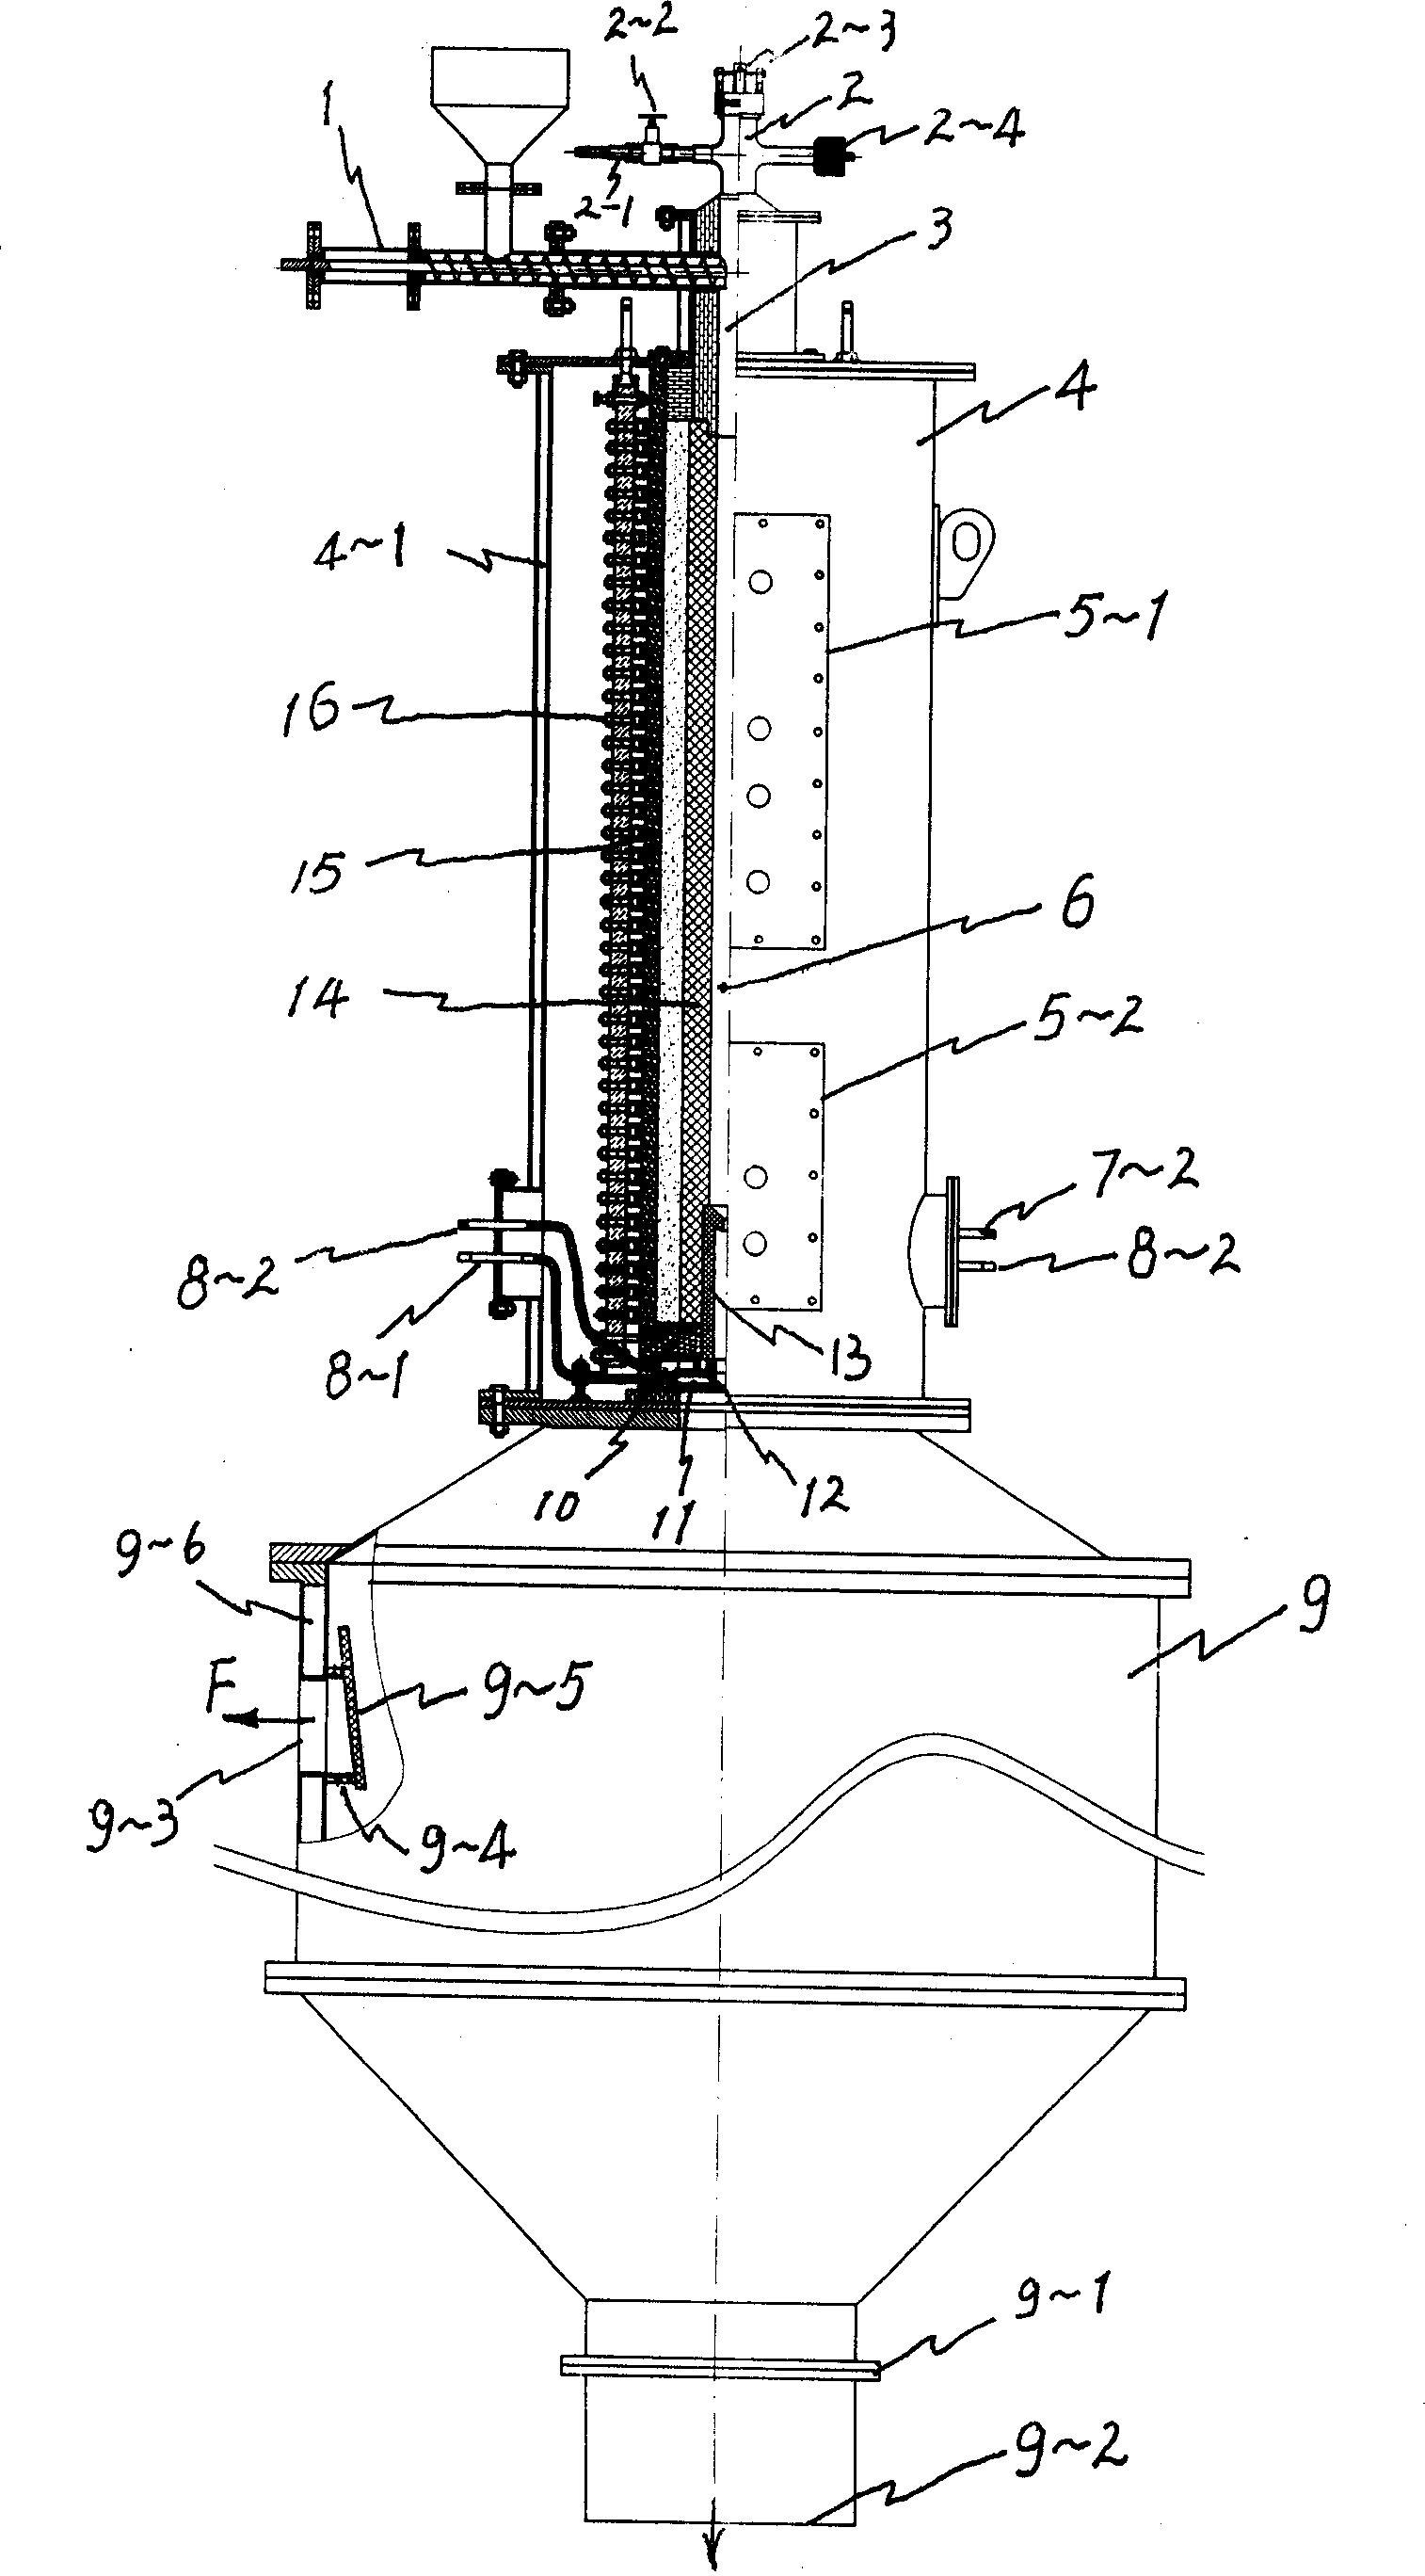 Atomizing formation apparatus for producing spherical casting WC powder